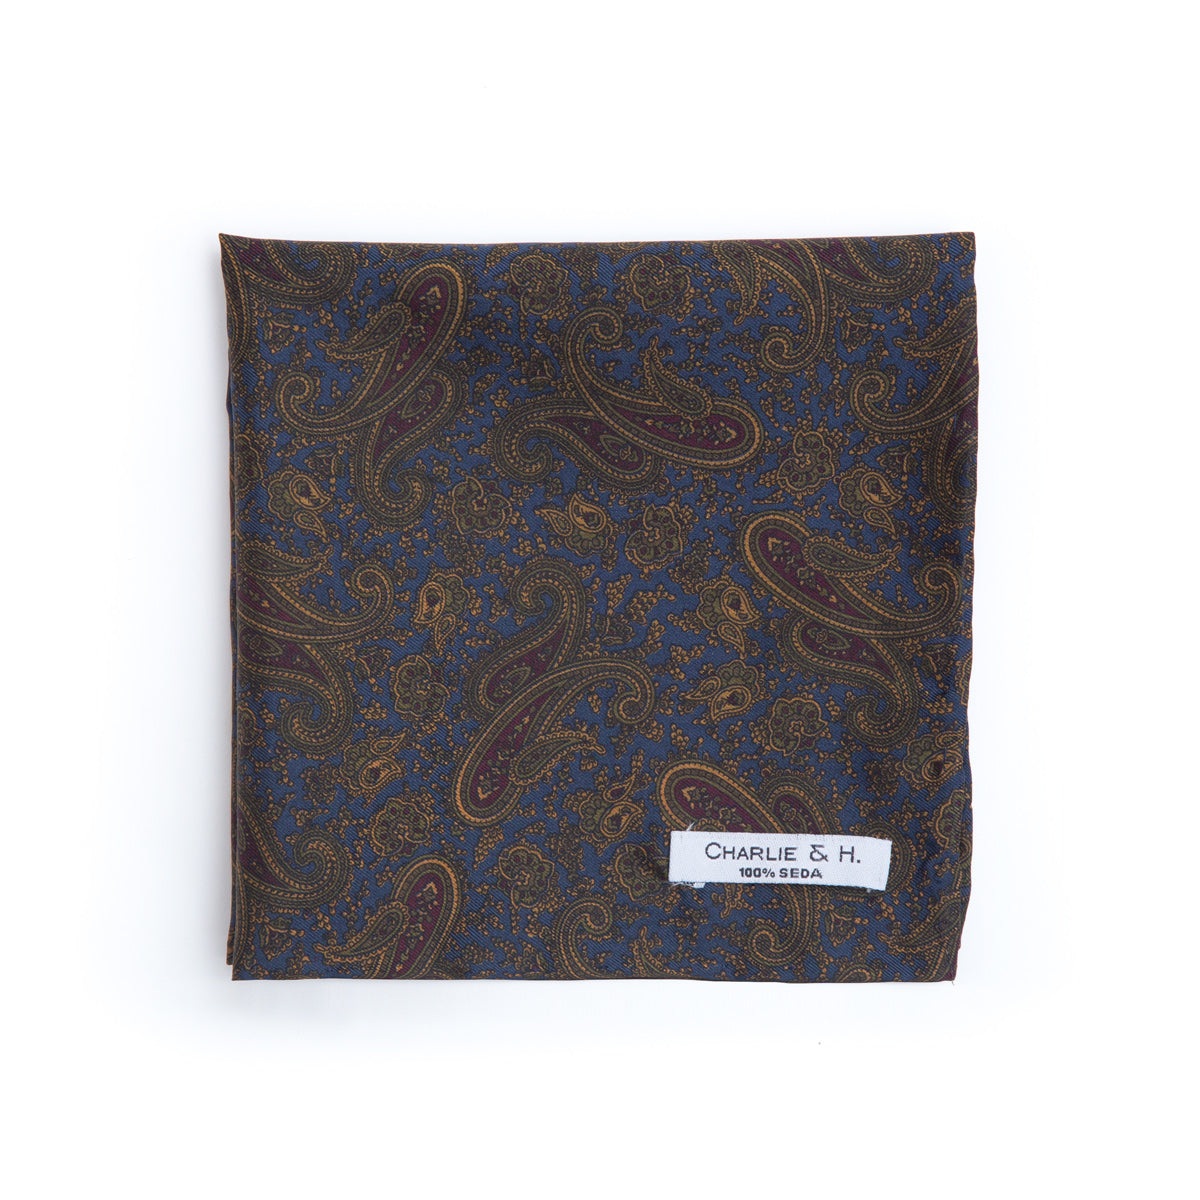 Gold paisley scarf